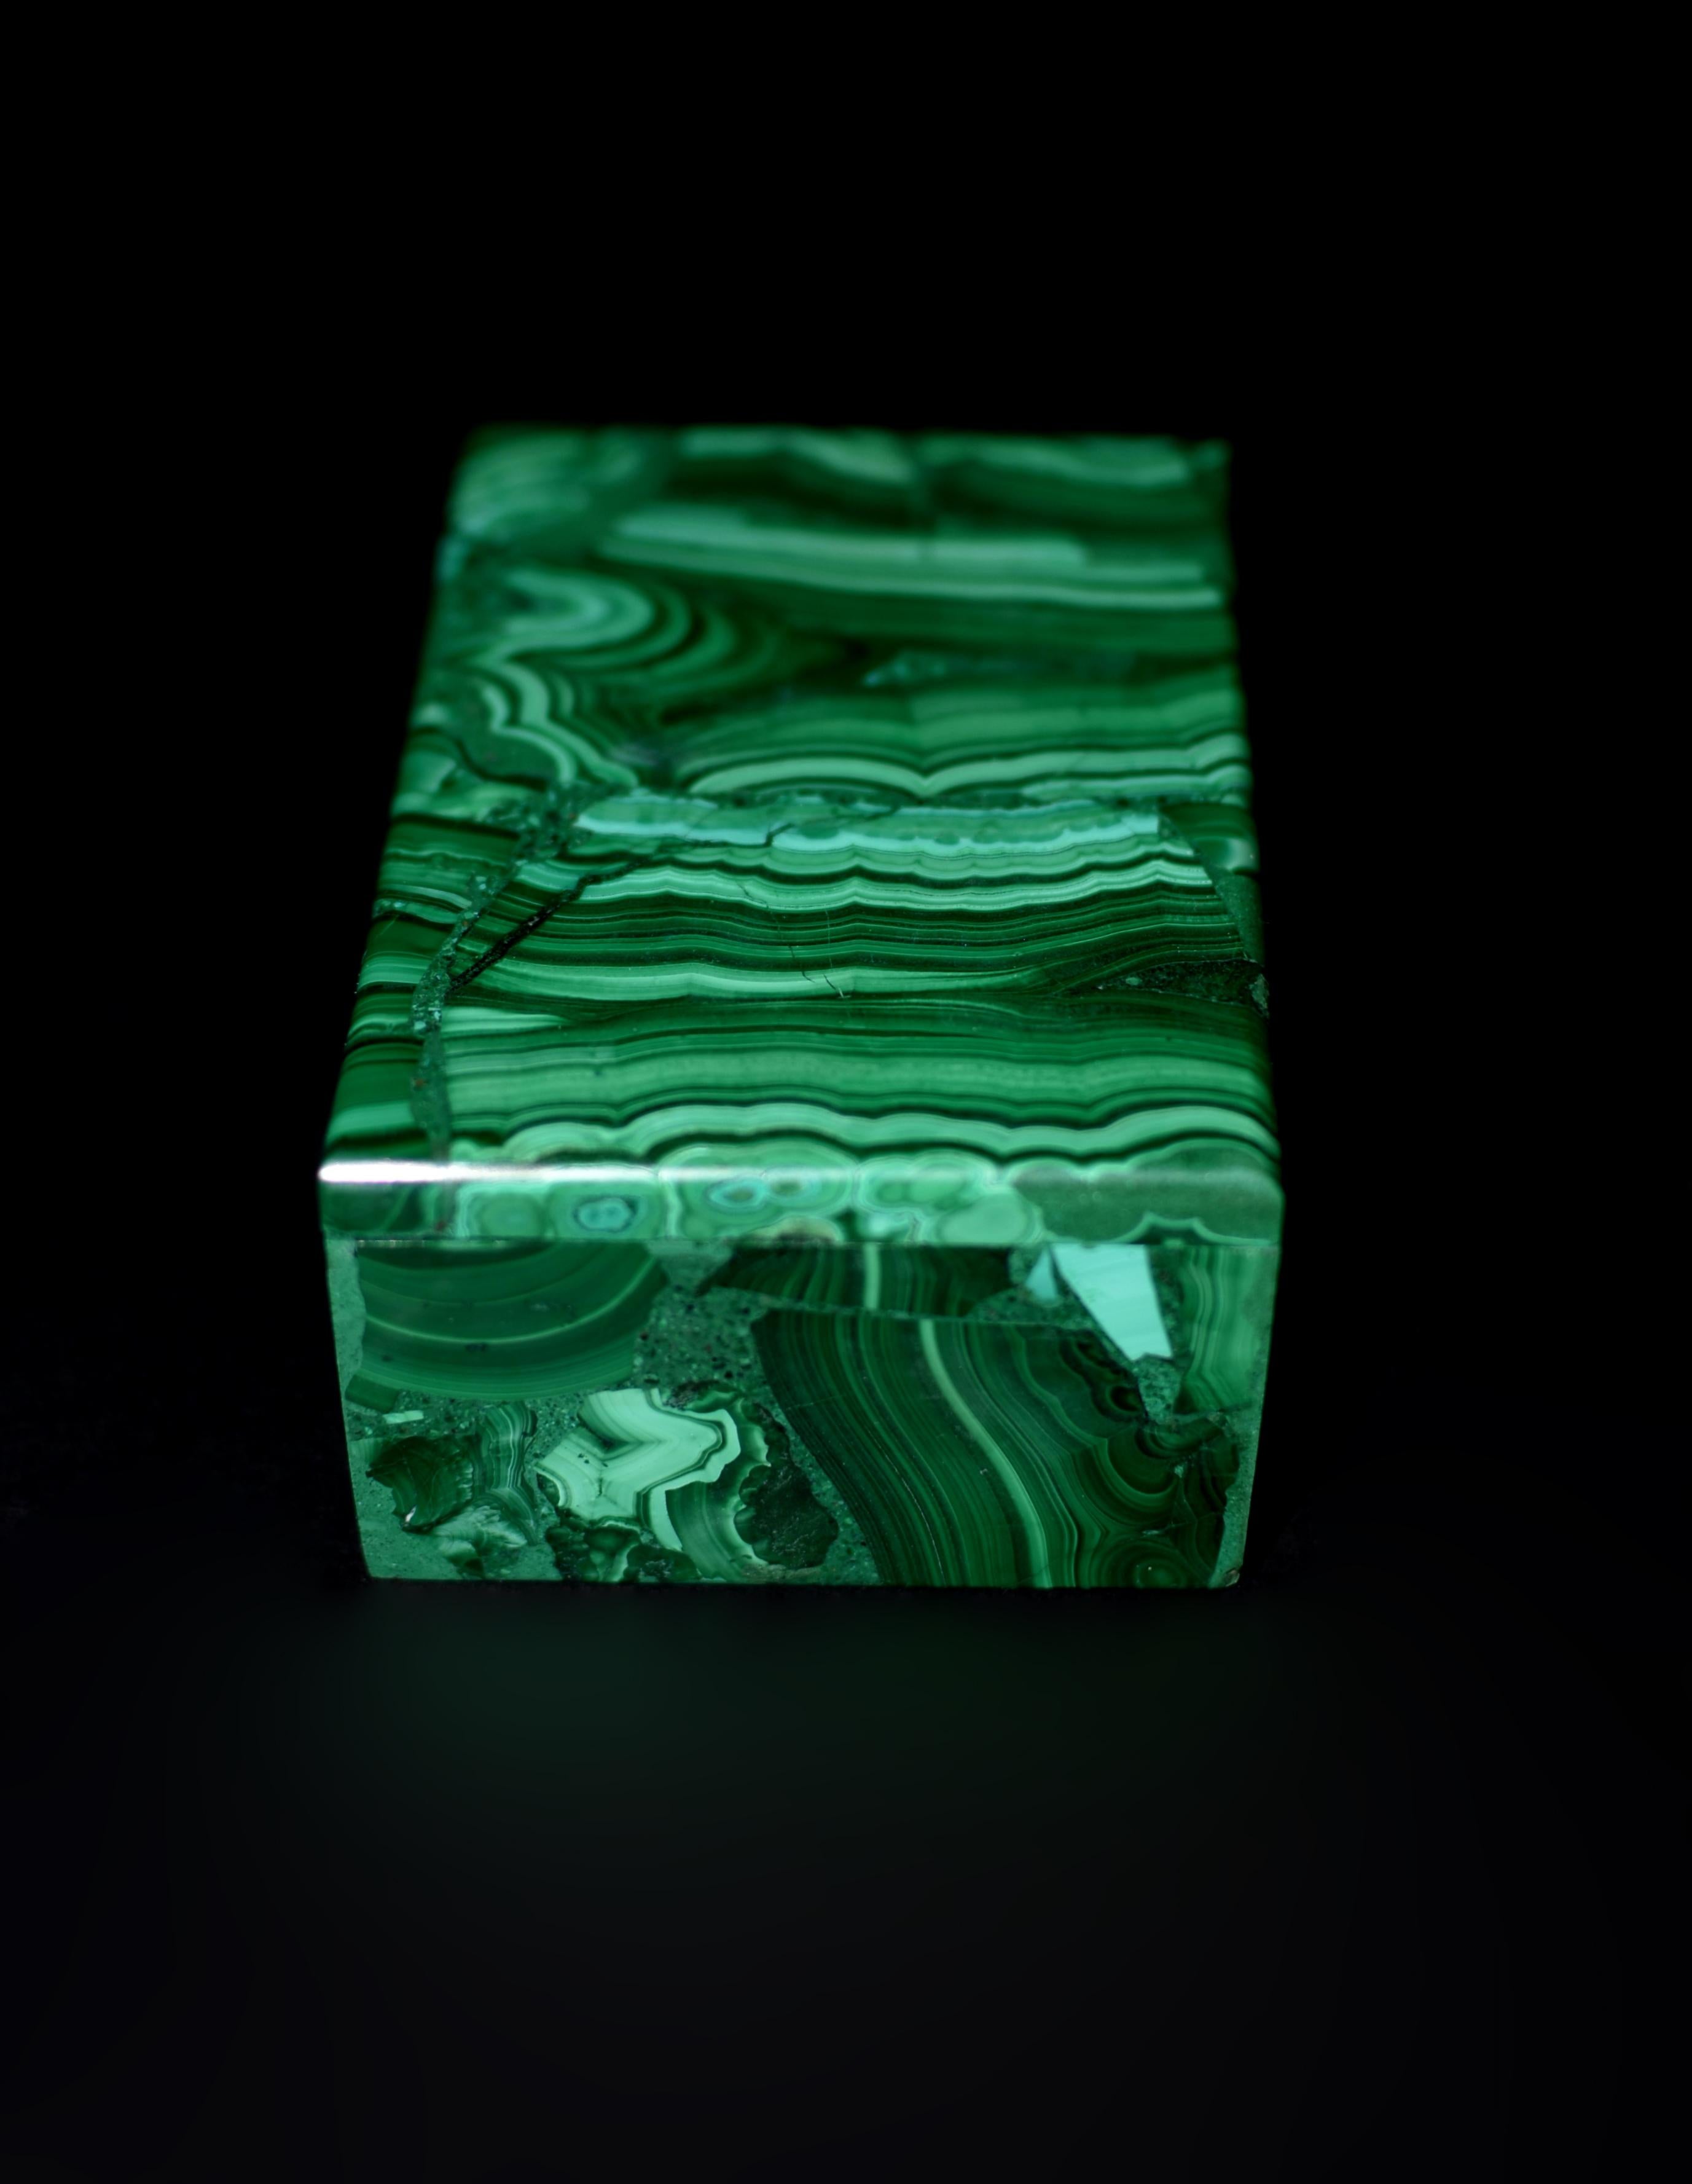 Hand-Crafted Malachite Box 1.1 lb Jewelry Box For Sale